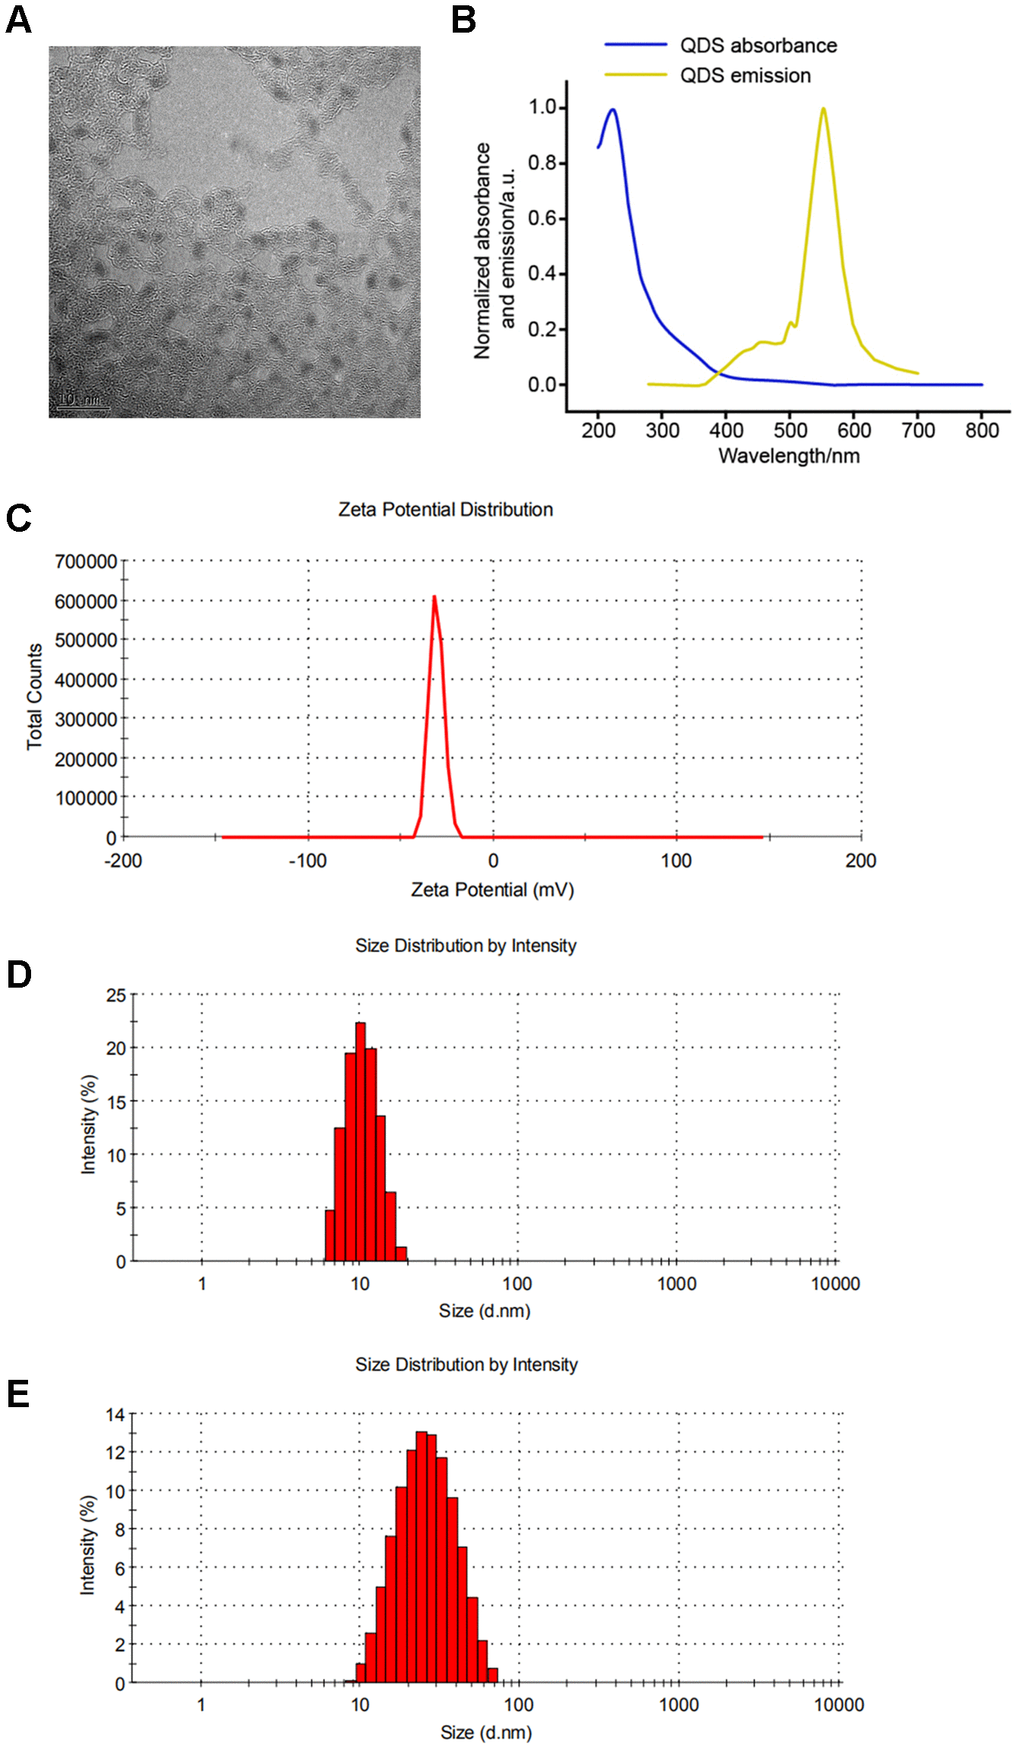 Characterization of CdSe/ZnS quantum dots (QDs). (A) The morphologies of CdSe/ZnS QDs by transmission electron microscopy. (B) The emission spectrum scanning of CdSe/ZnS QDs. (C) The zeta potential analyses and dynamic light scattering plots of CdSe/ZnS QDs cultured in DMEM for 0 (D) and 24 h (E).